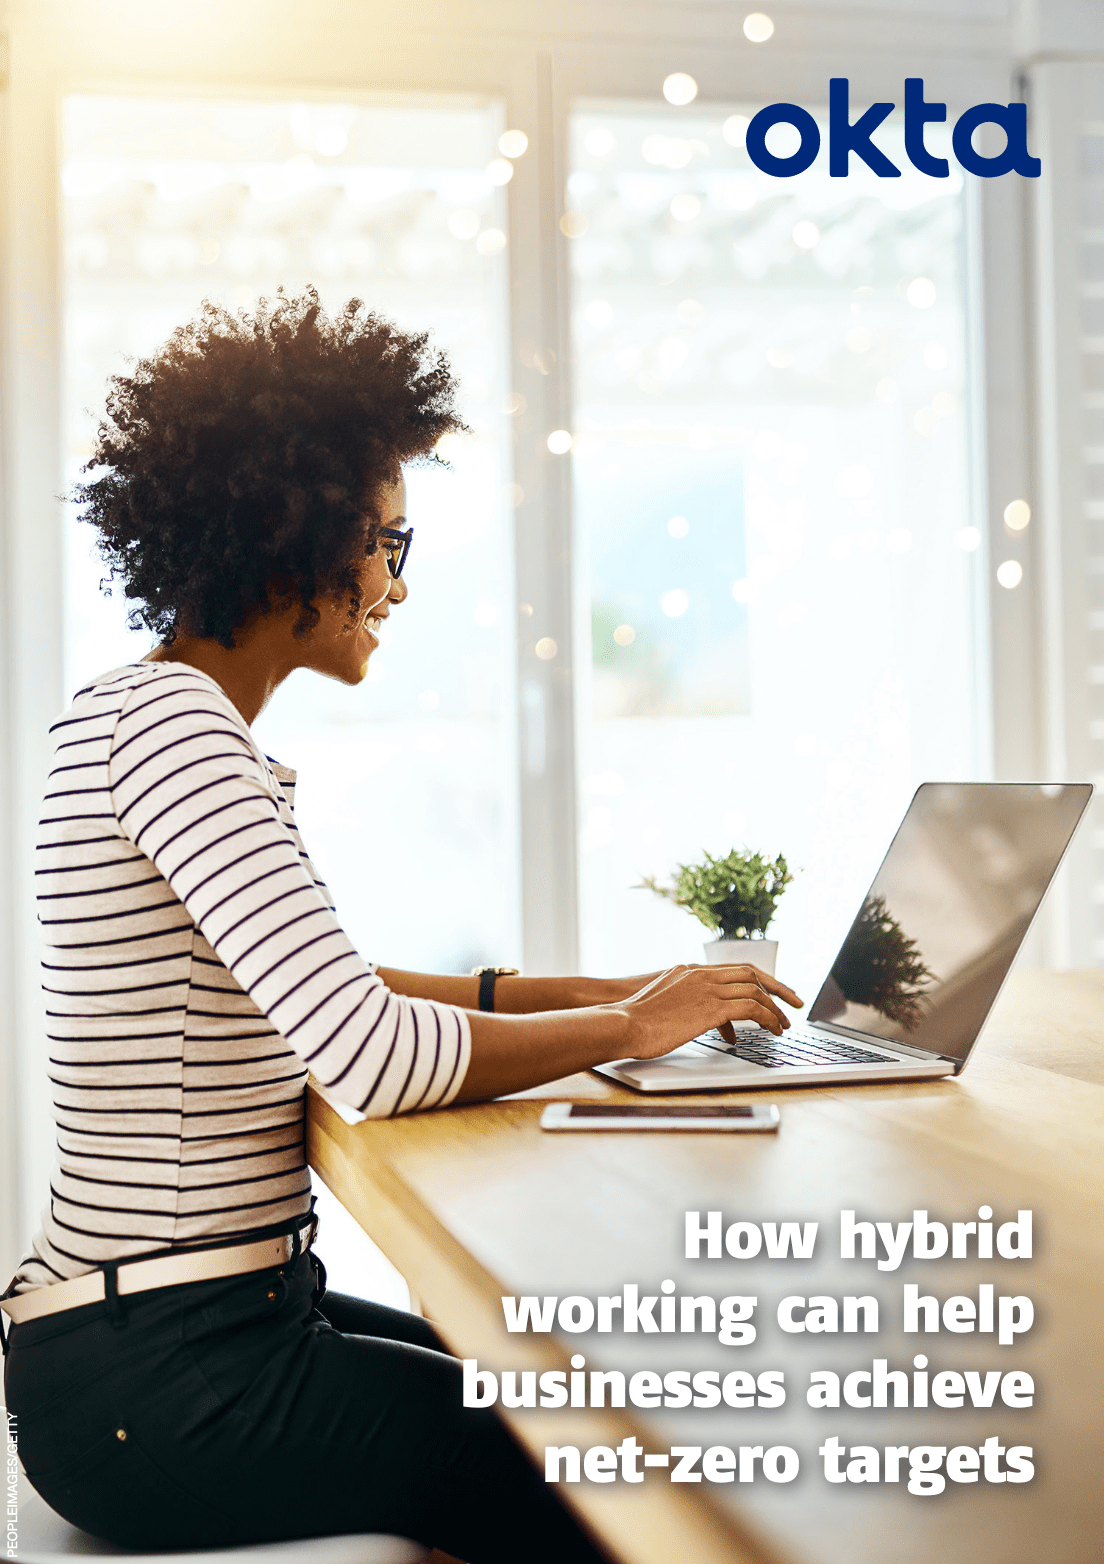 How hybrid working - How hybrid working can help businesses achieve net-zero targets